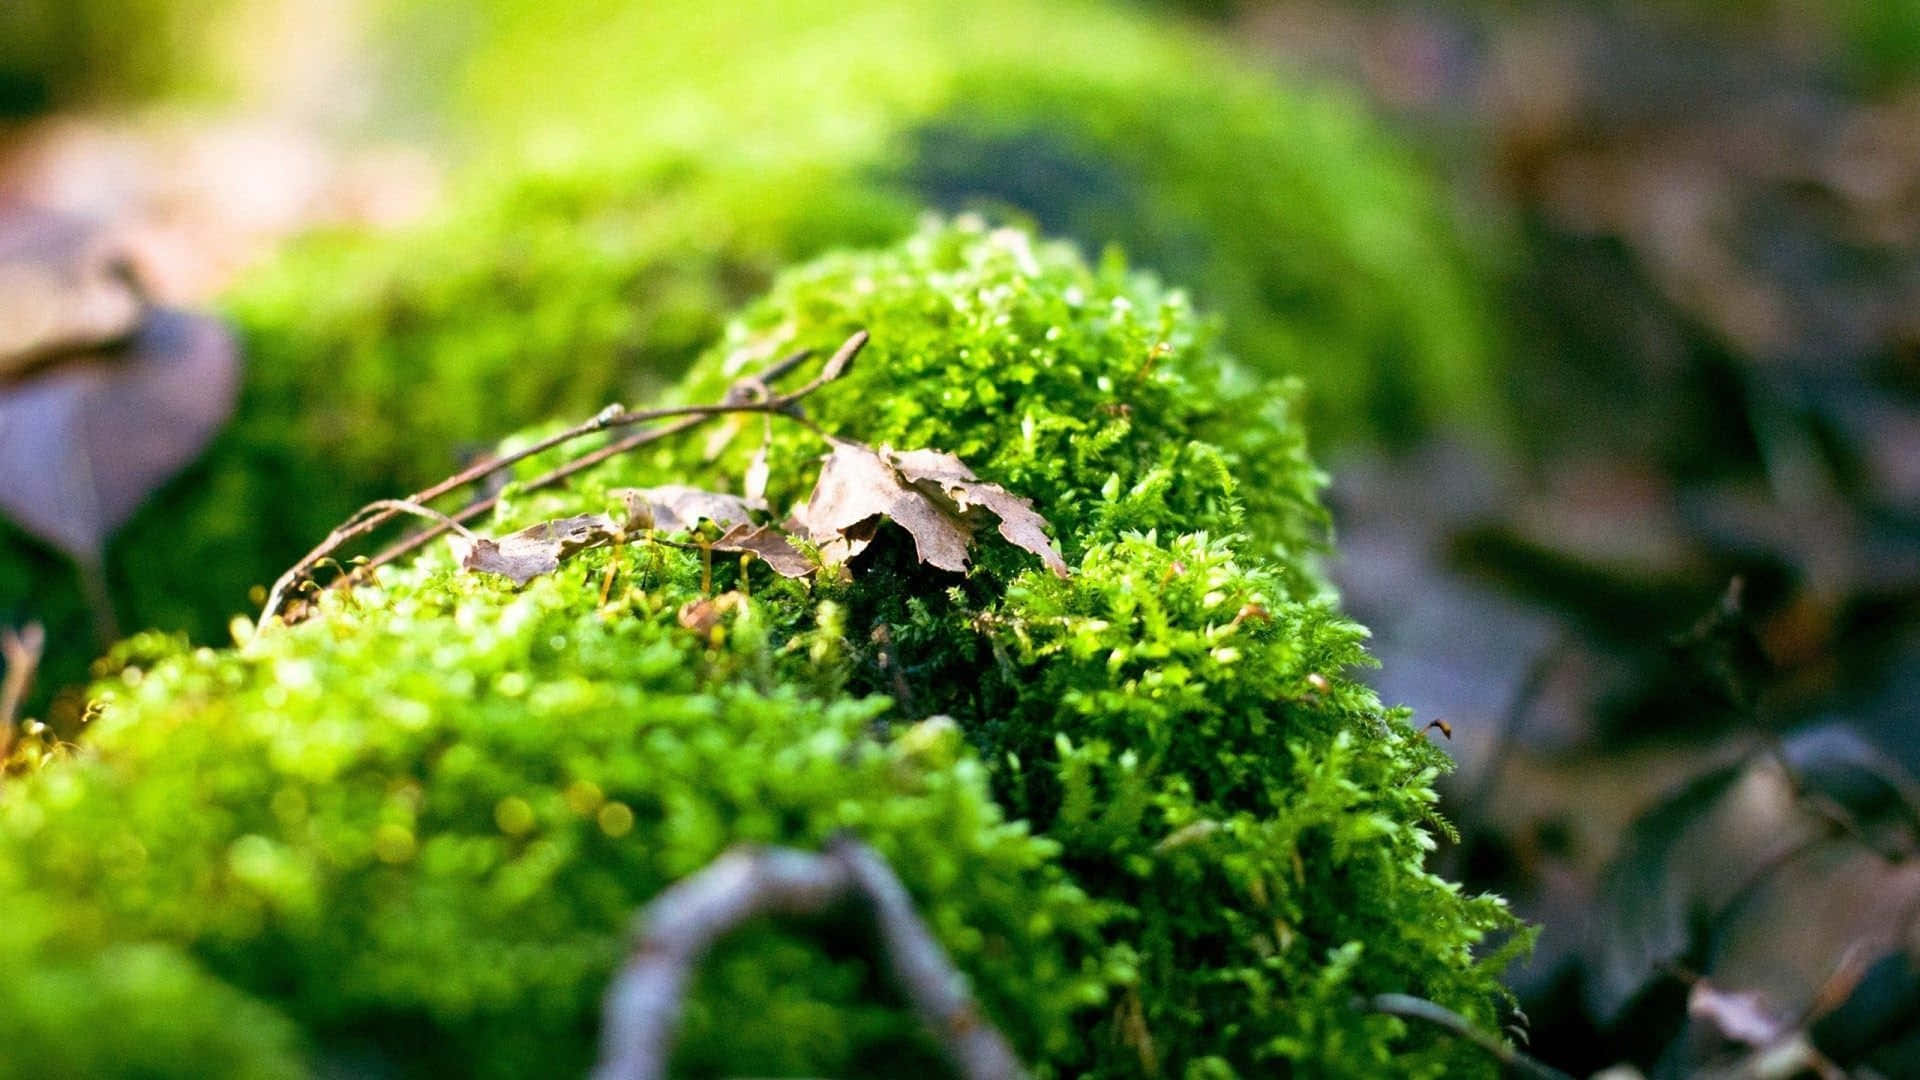 Exquisite Green Moss On A Rock